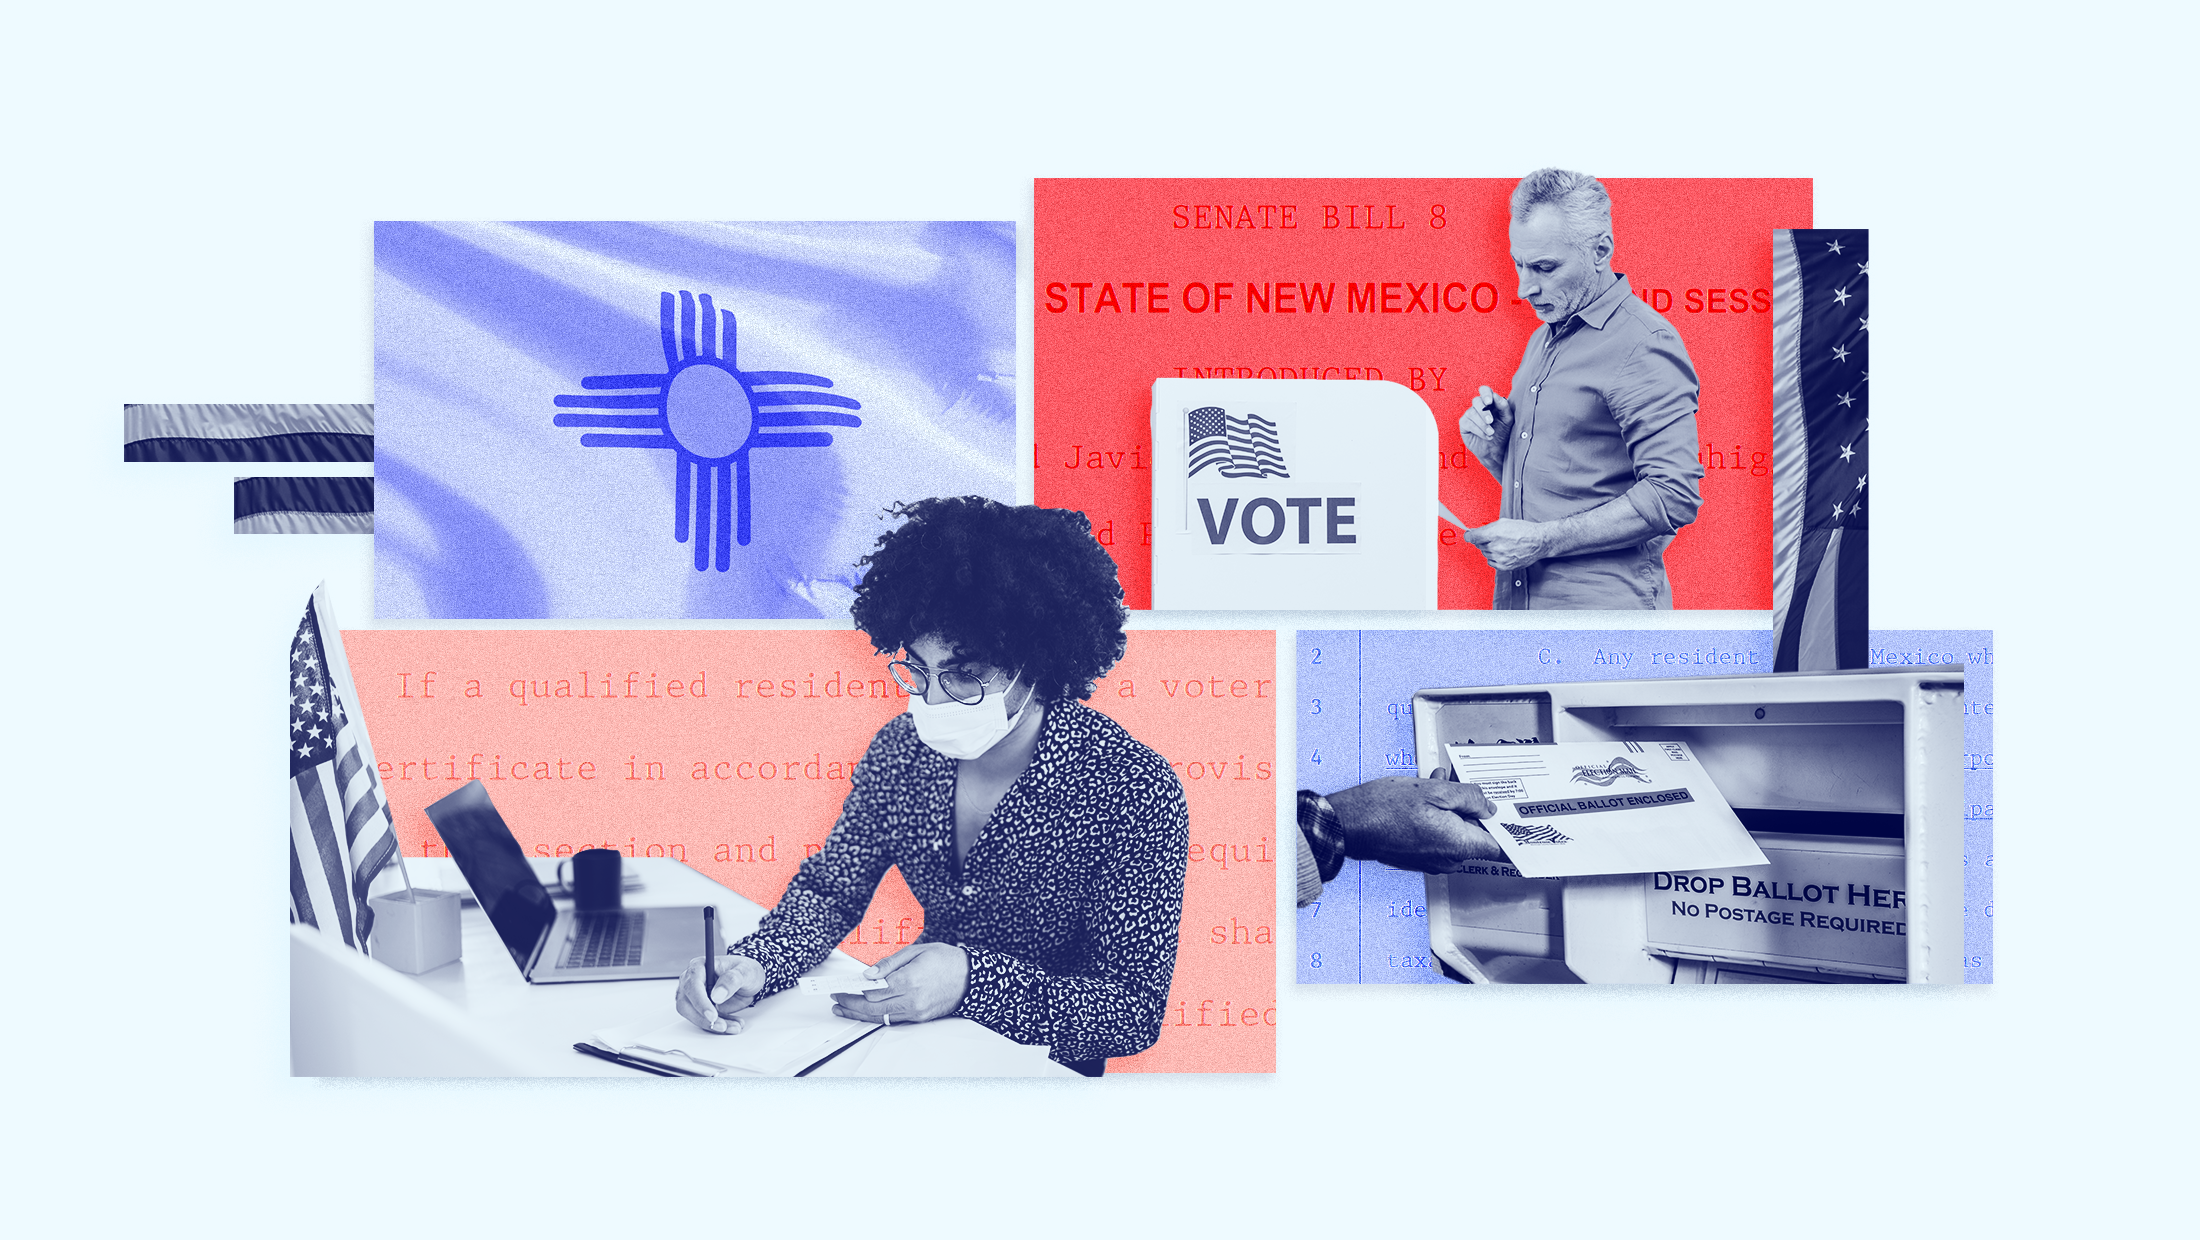 Four panels of images sit on top of a solid blue background. on the top left, the New Mexico state flag. Next to it on the right, a man putting a ballot into a drop box. On the bottom left, a woman writes at a desk with pen and paper. On the bottom right, a closeup shows a hand putting a ballot into a dropbox.